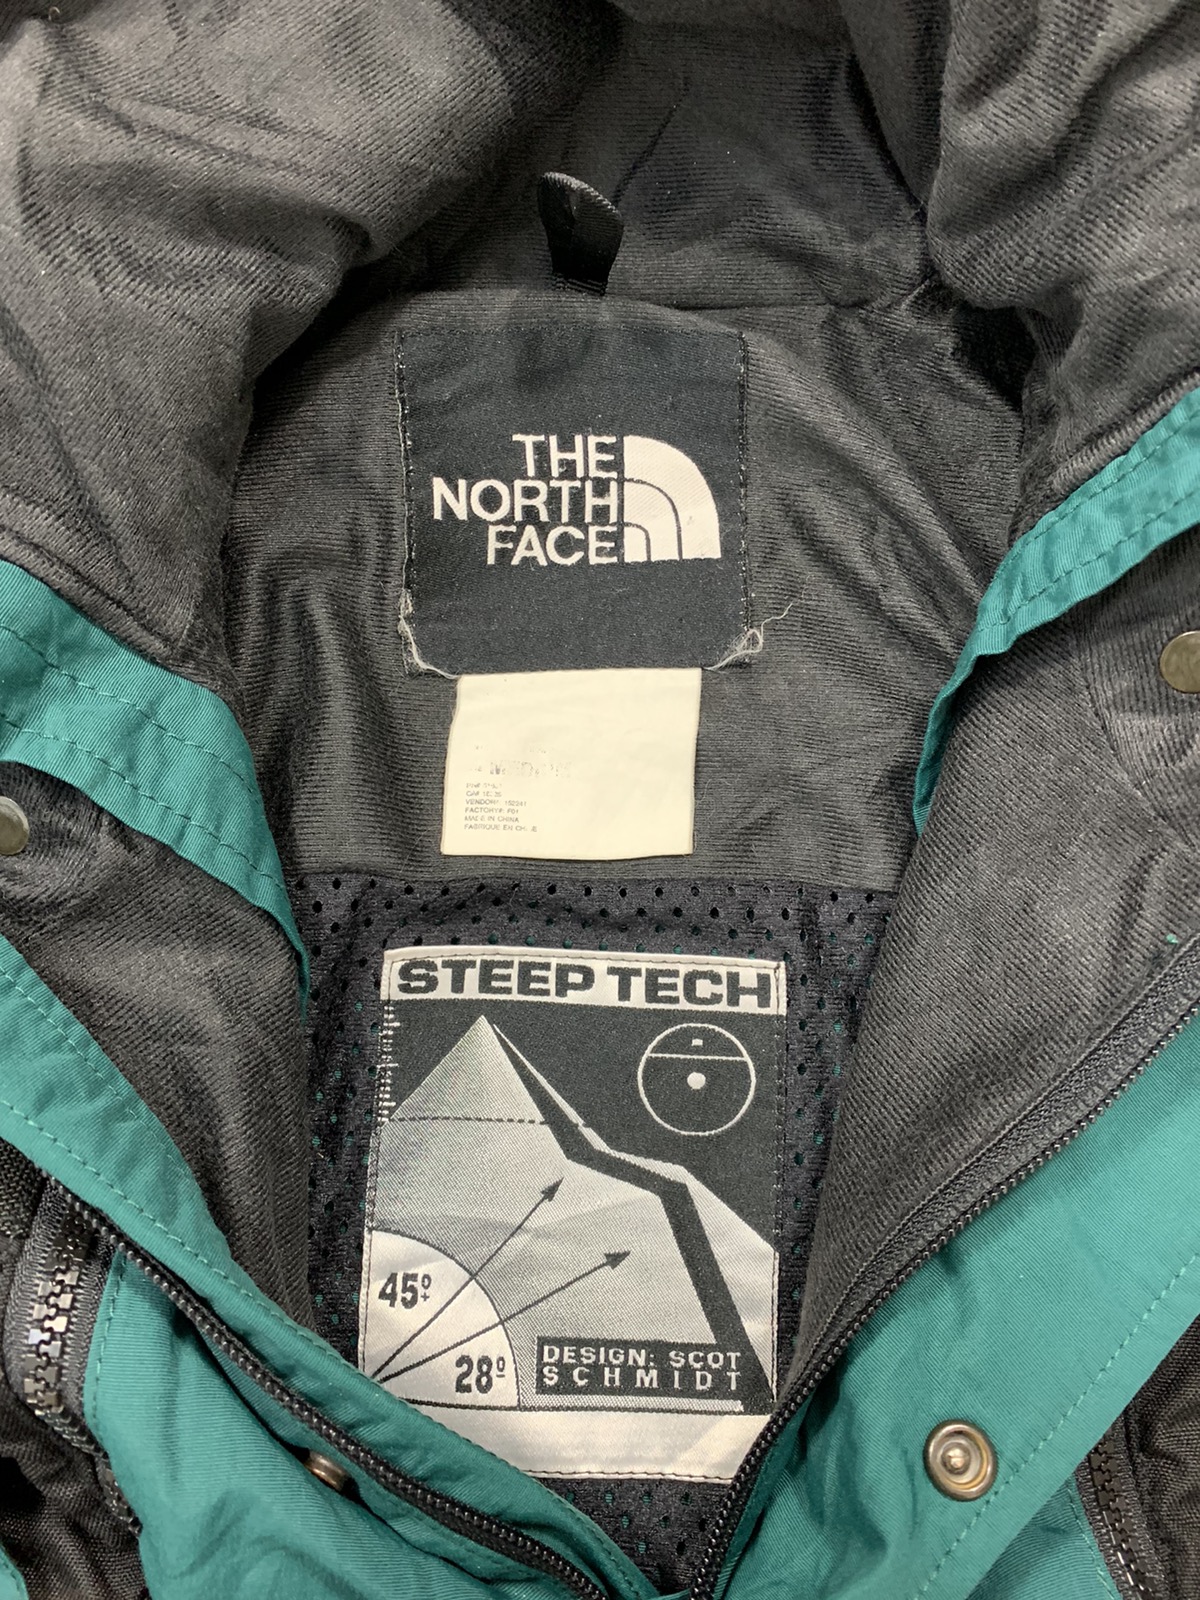 The North Face Steep Tech Tactical Ski Hiking Winter - 4